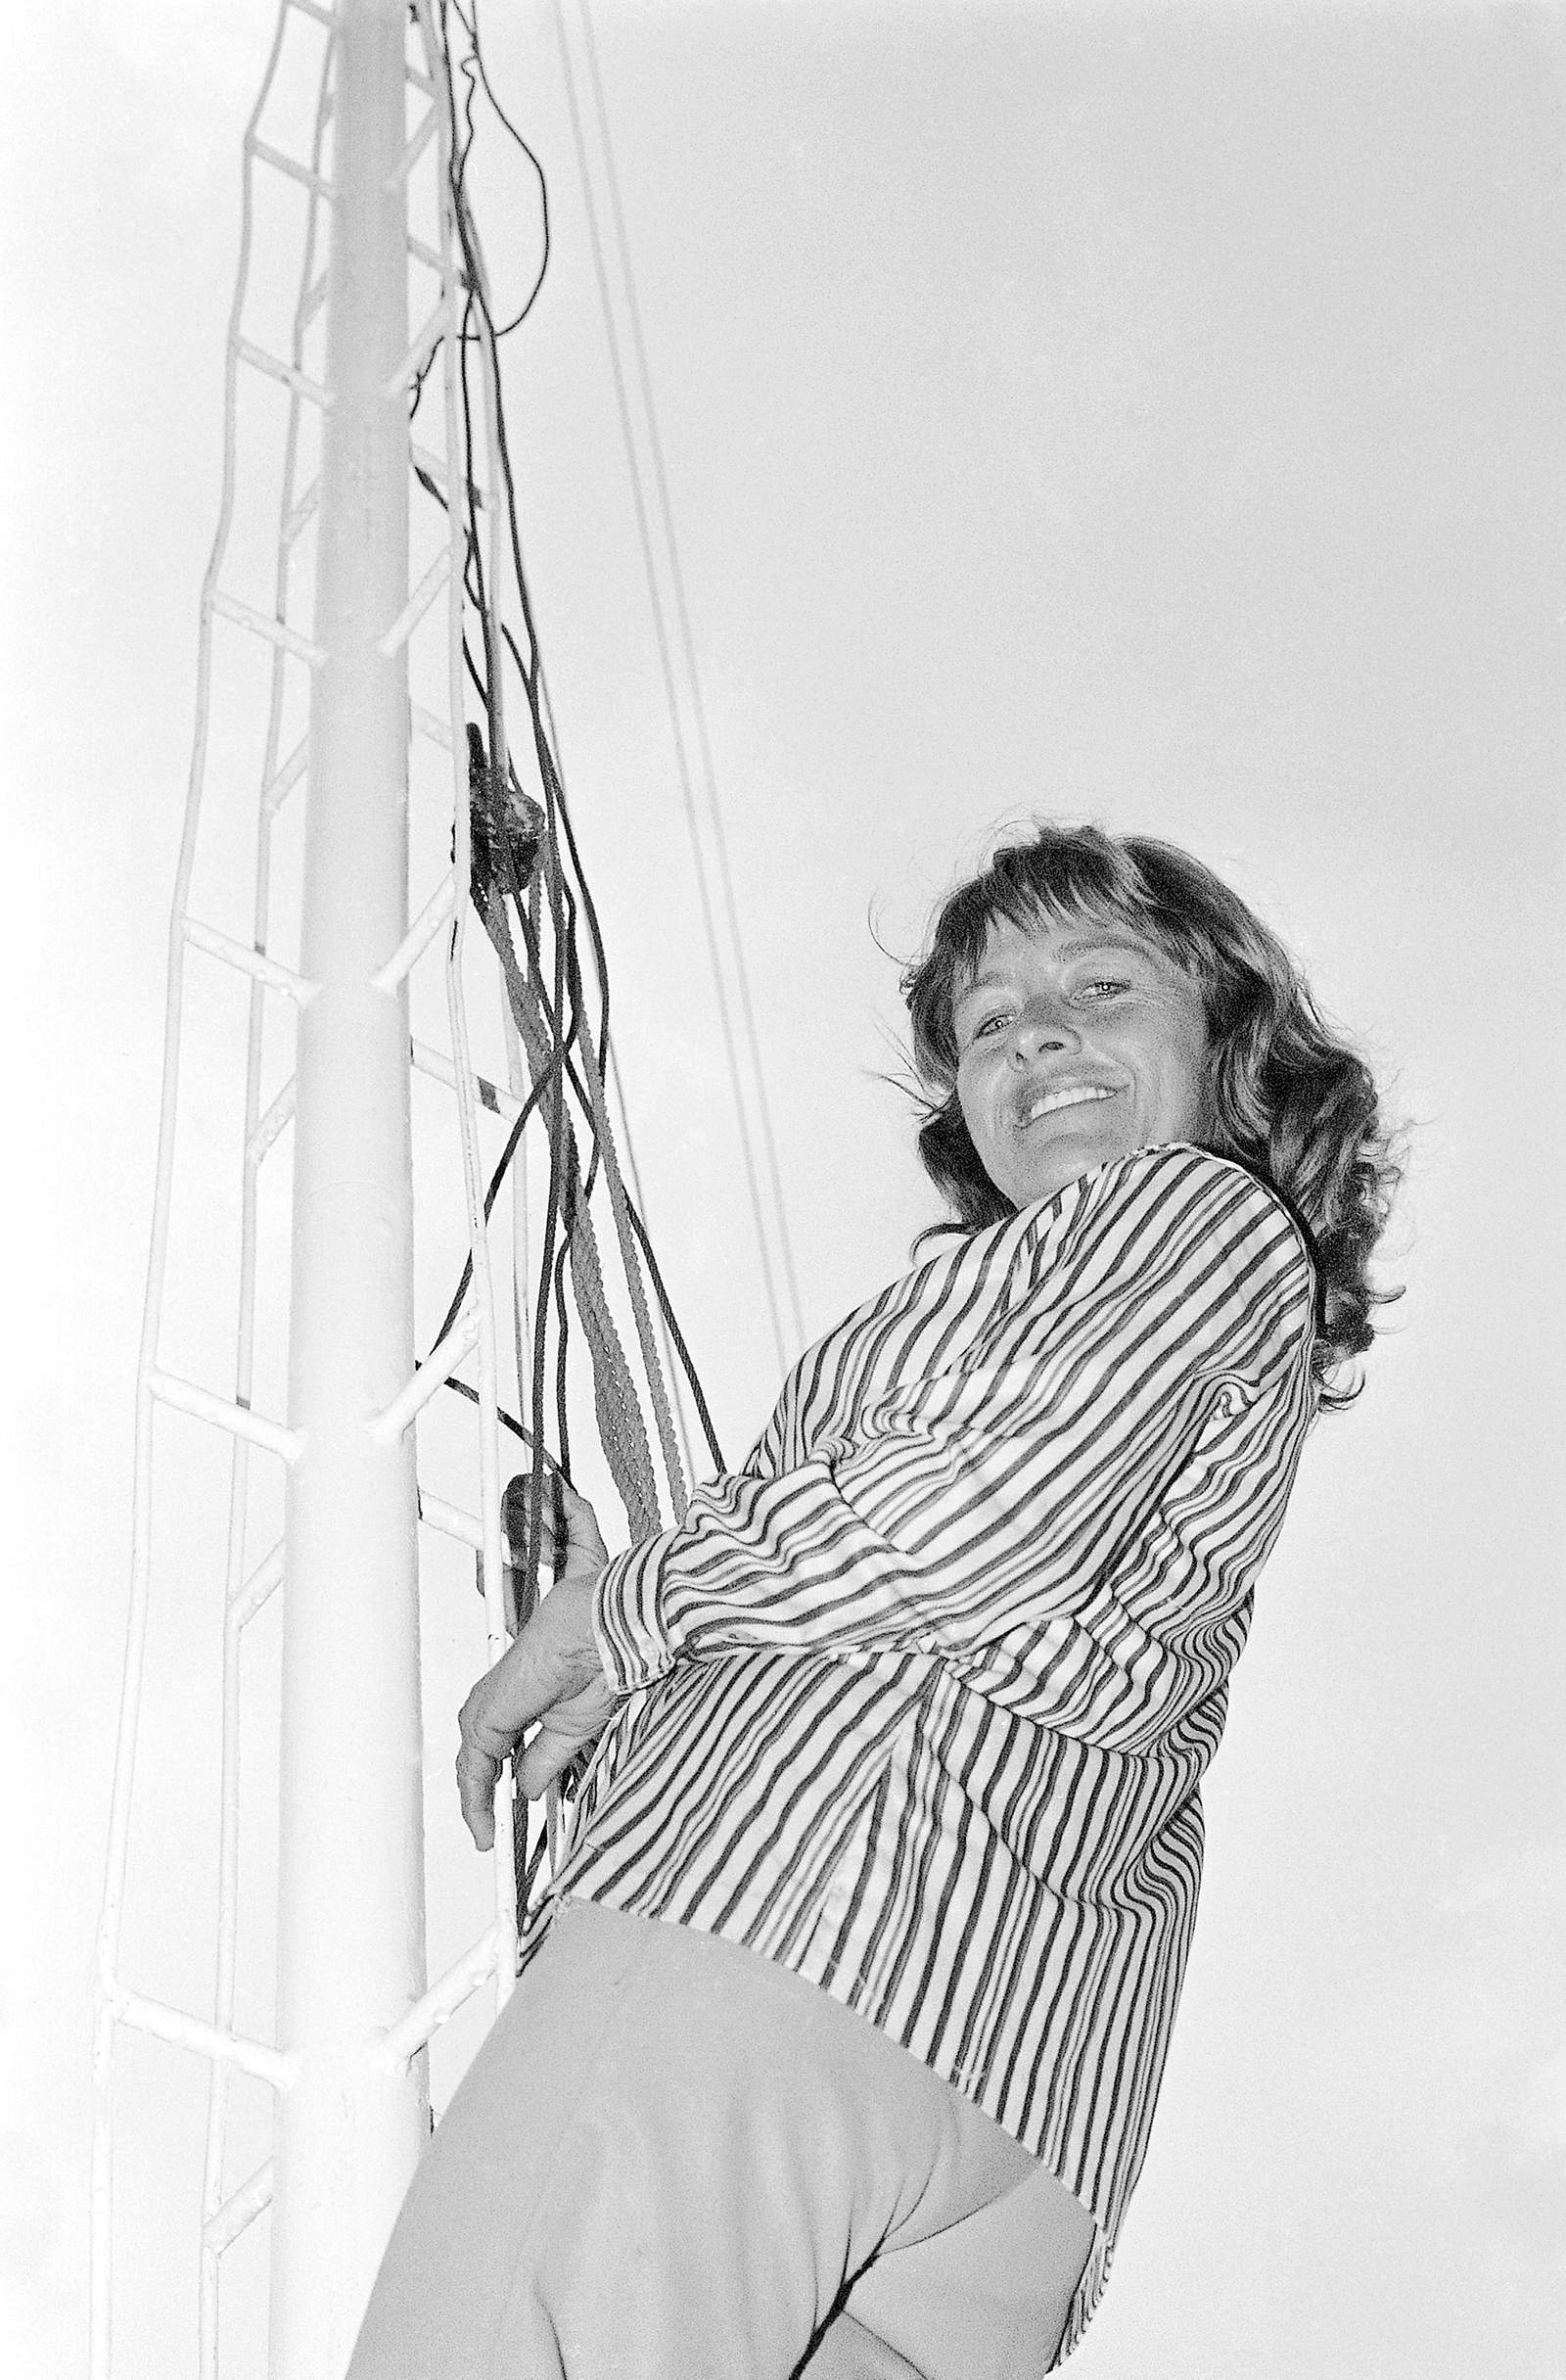 Carla Wallenda, member of famed high-wire act, dies at 85